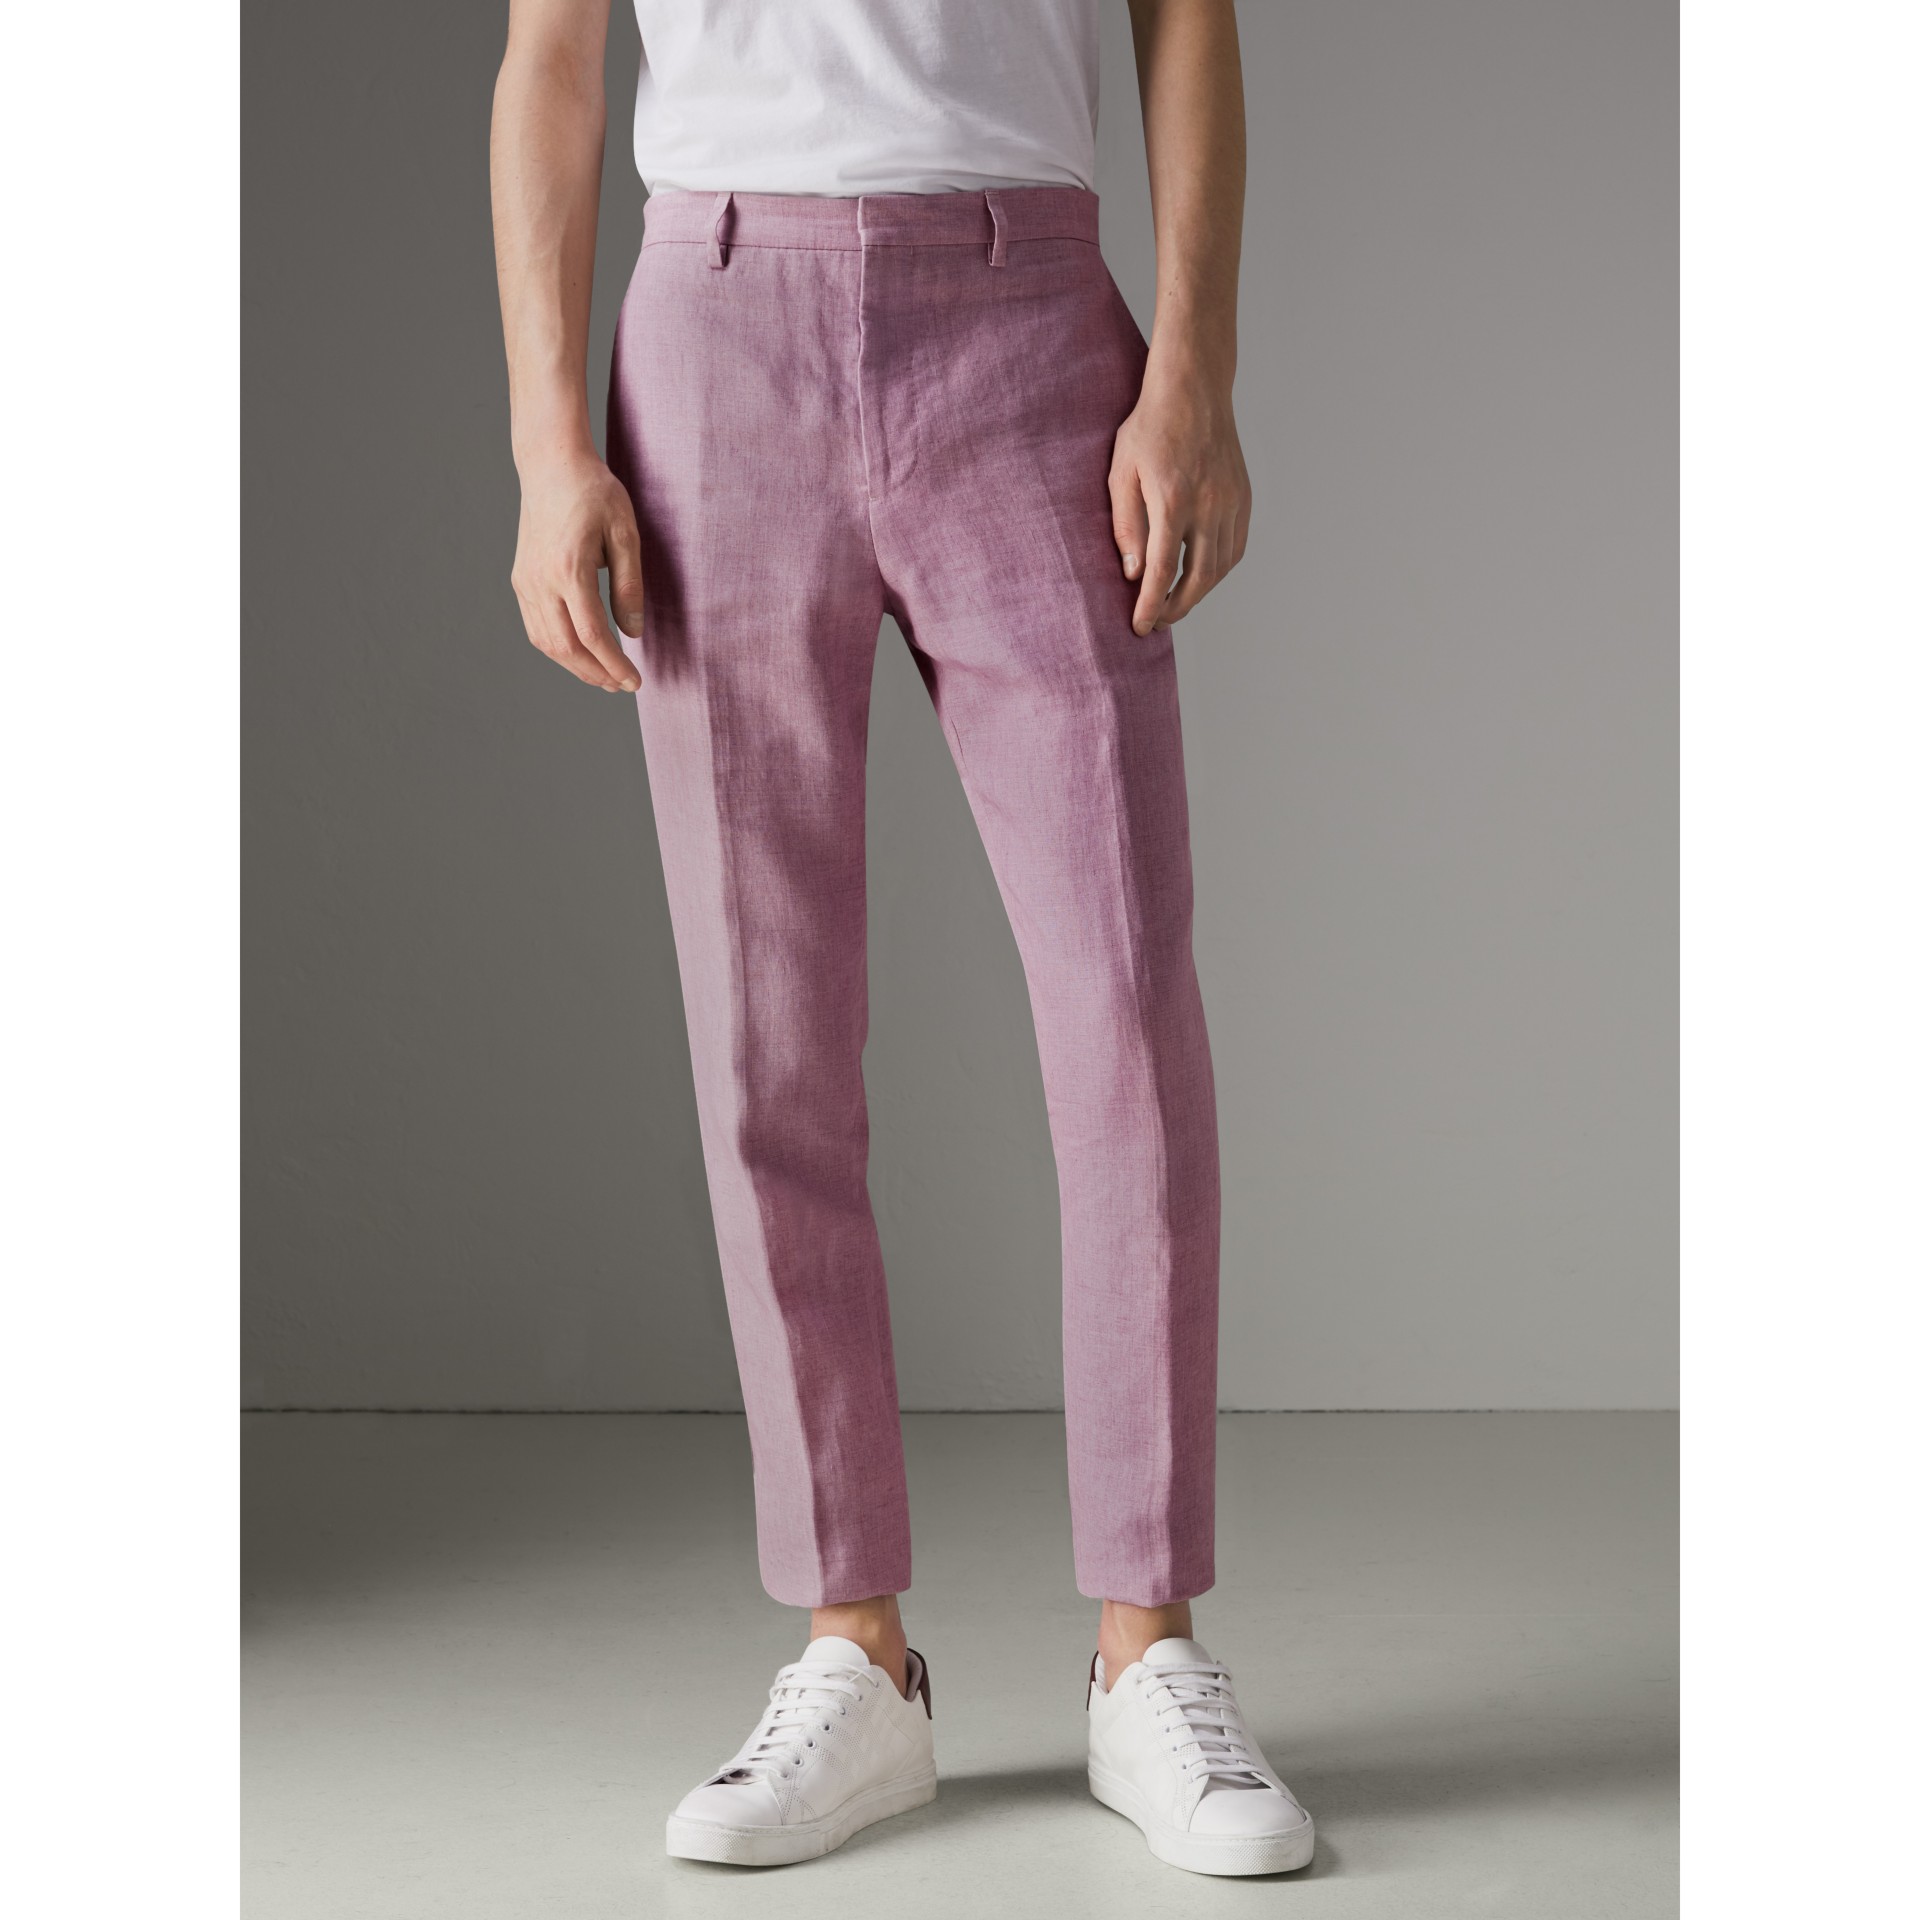 Soho Fit Linen Trousers in Pink Heather - Men | Burberry United States